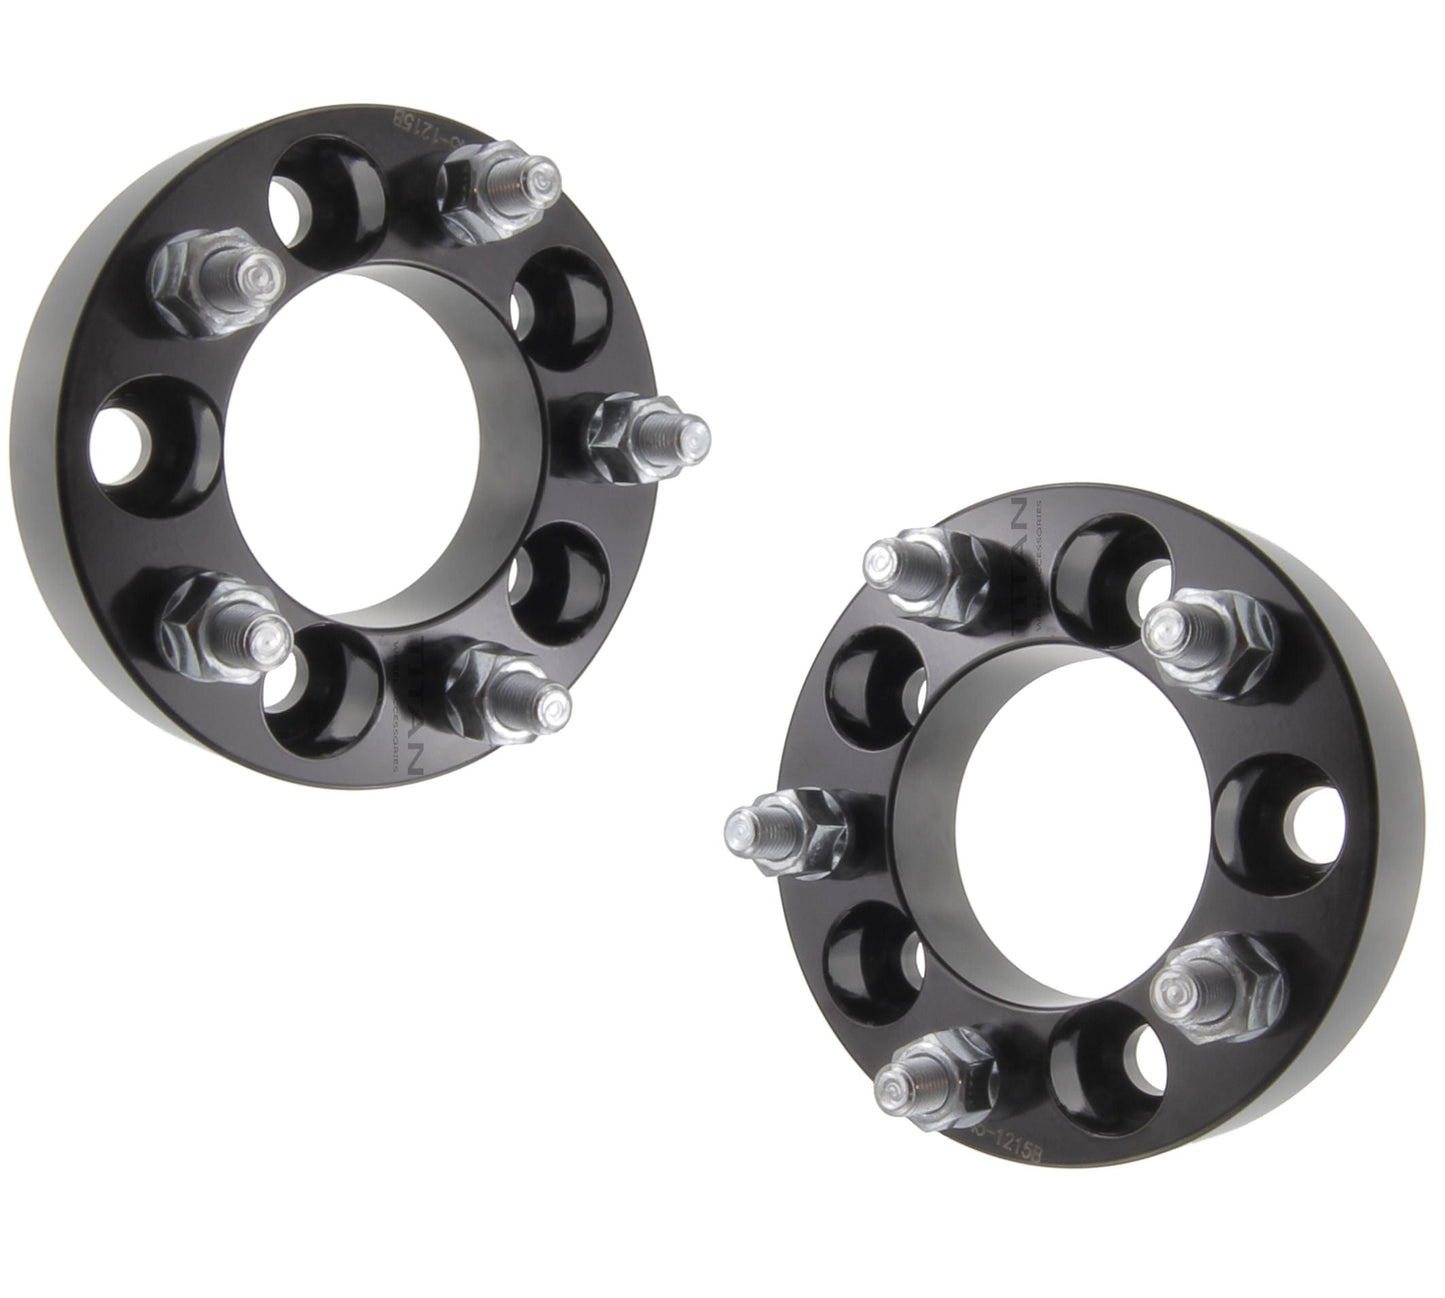 32mm (1.25") Titan Wheel Spacers for Chevy Buick Cadillac Oldsmobile | 5x114.3 (5x4.5) | 12x1.5 Studs | Set of 4 | Titan Wheel Accessories